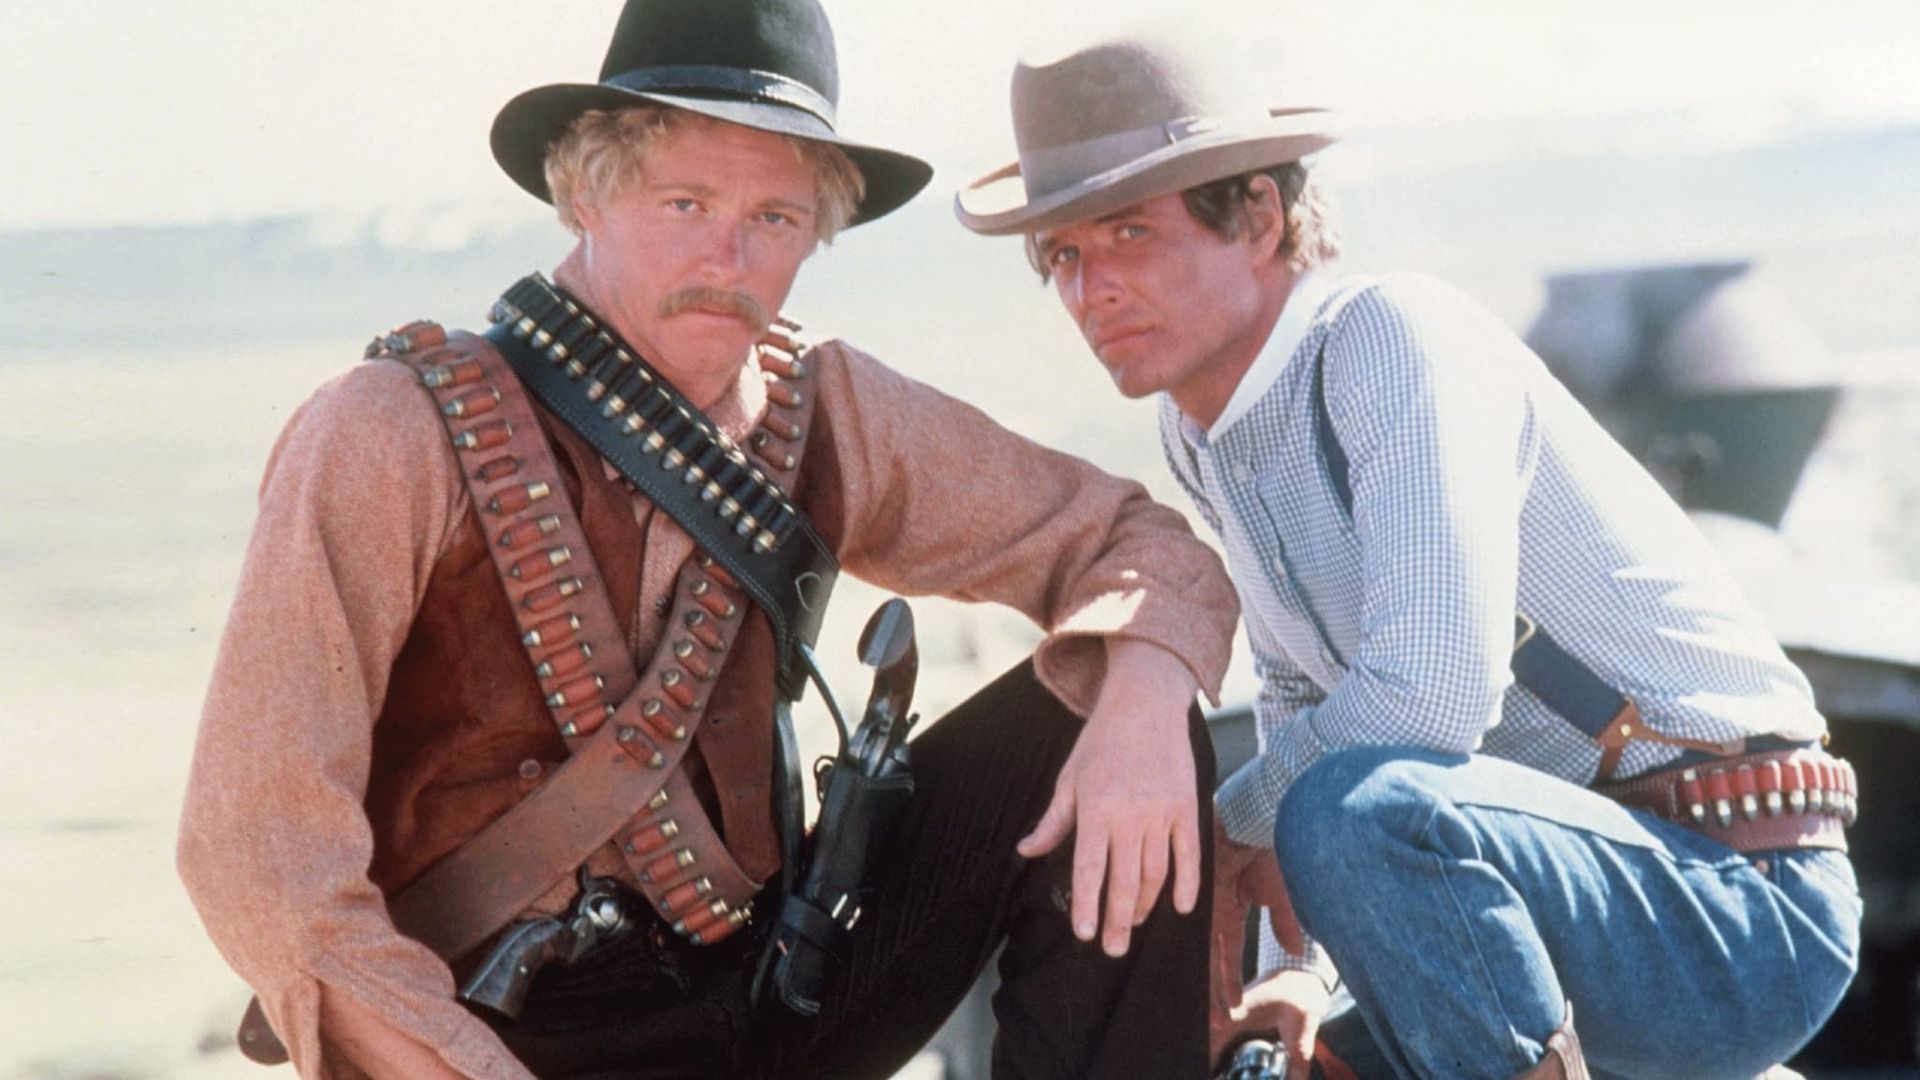 Butch and Sundance: The Early Days background